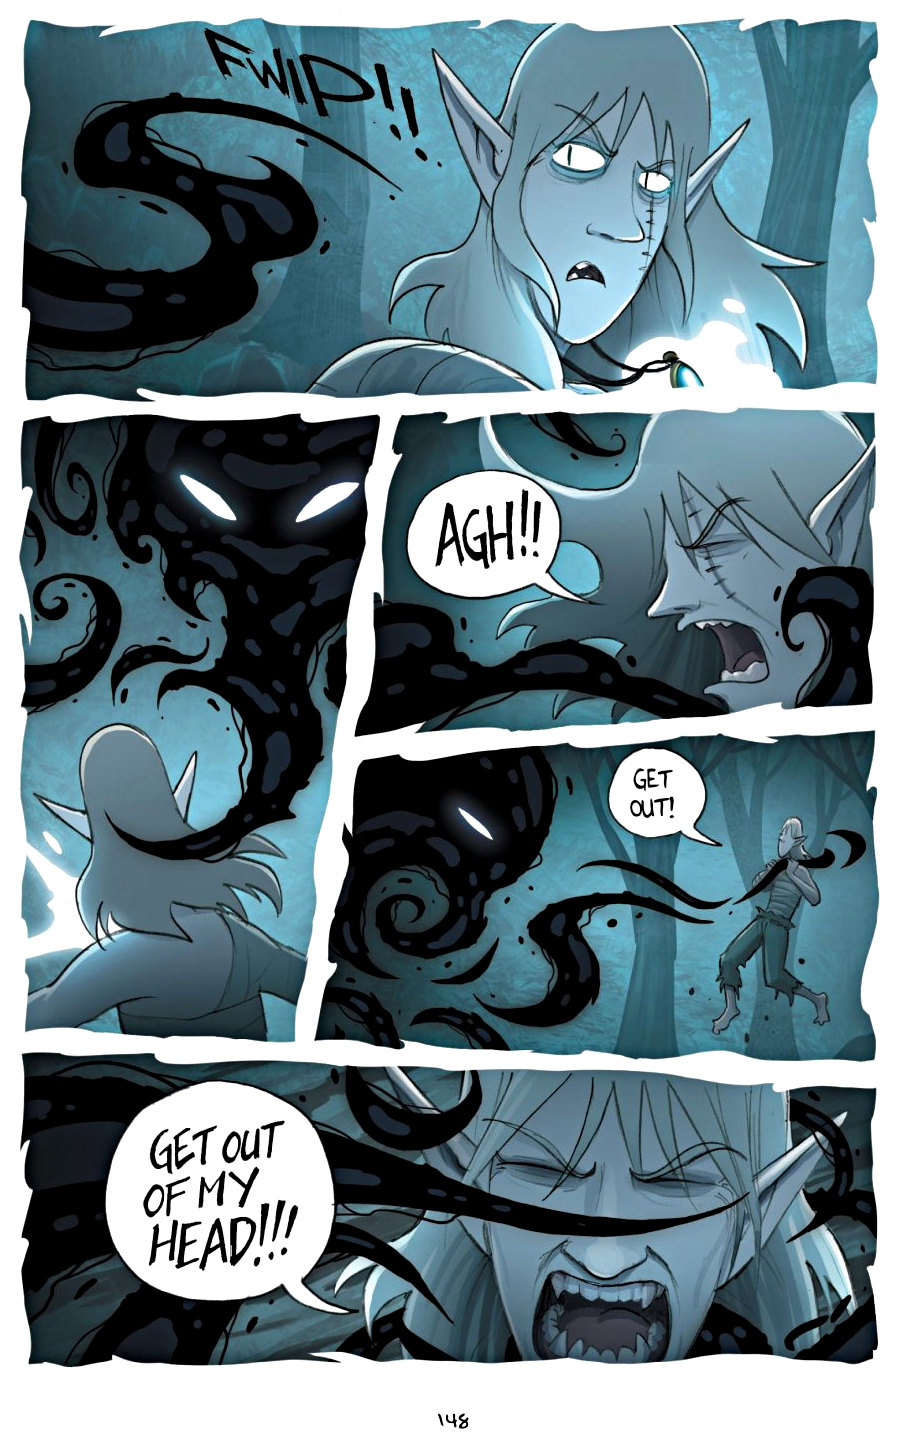 page 148 of amulet 5 prince of the elves graphic novel